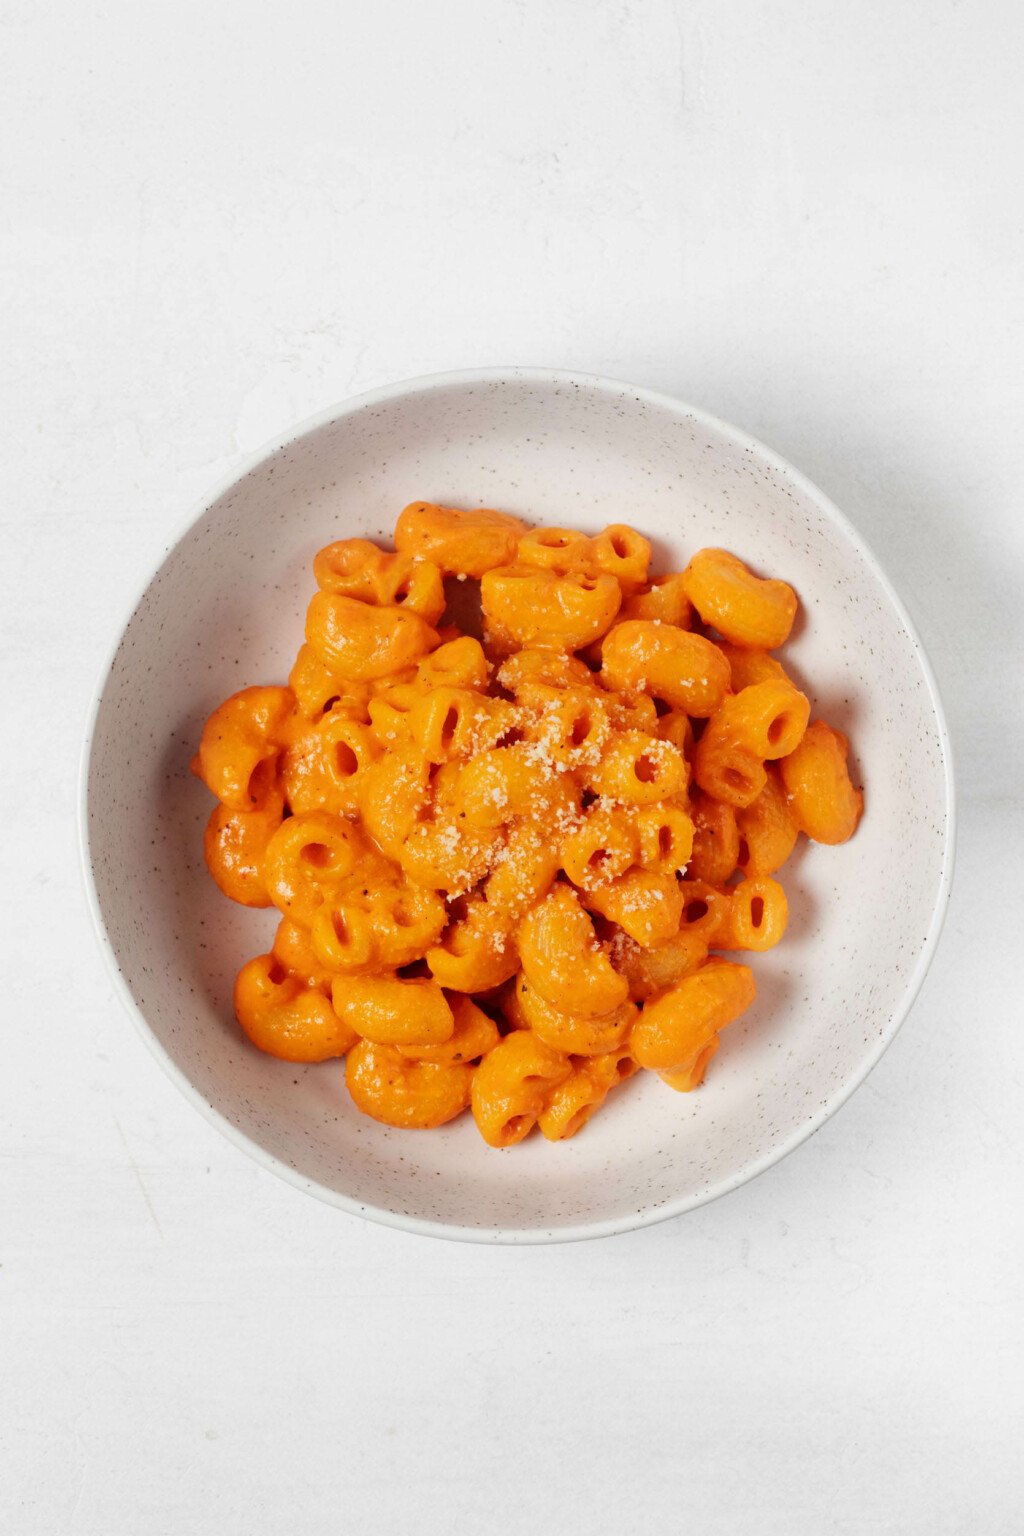 An overhead image of a round, white ceramic bowl, which is filled with a vegan mac and cheese recipe. The color of the pasta sauce is vibrant orange.